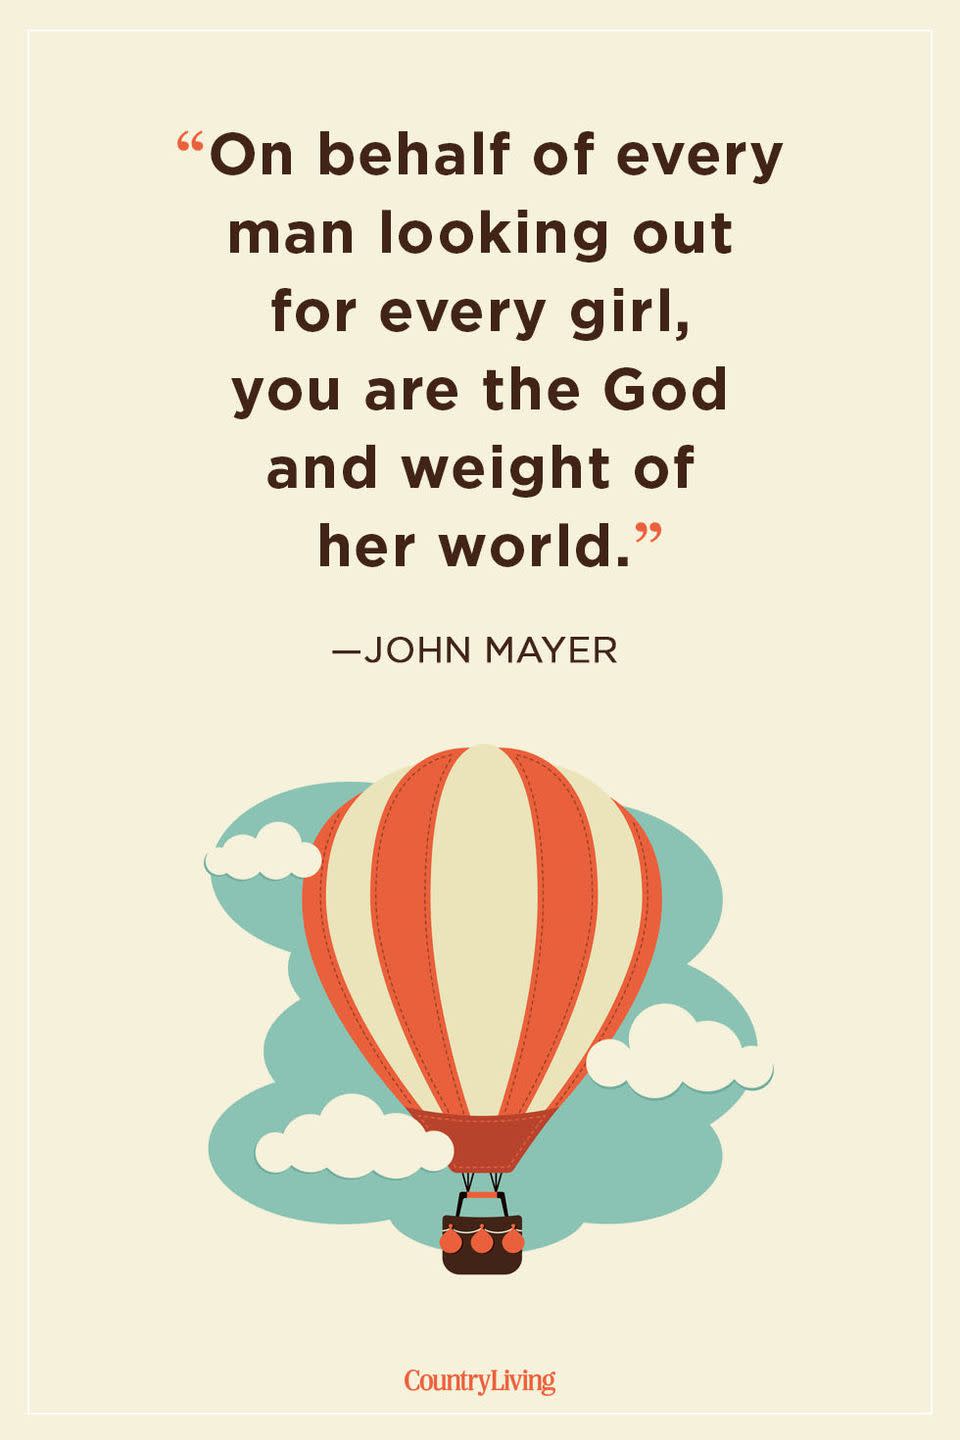 <p>“On behalf of every man looking out for every girl, you are the God and weight of her world.”</p>